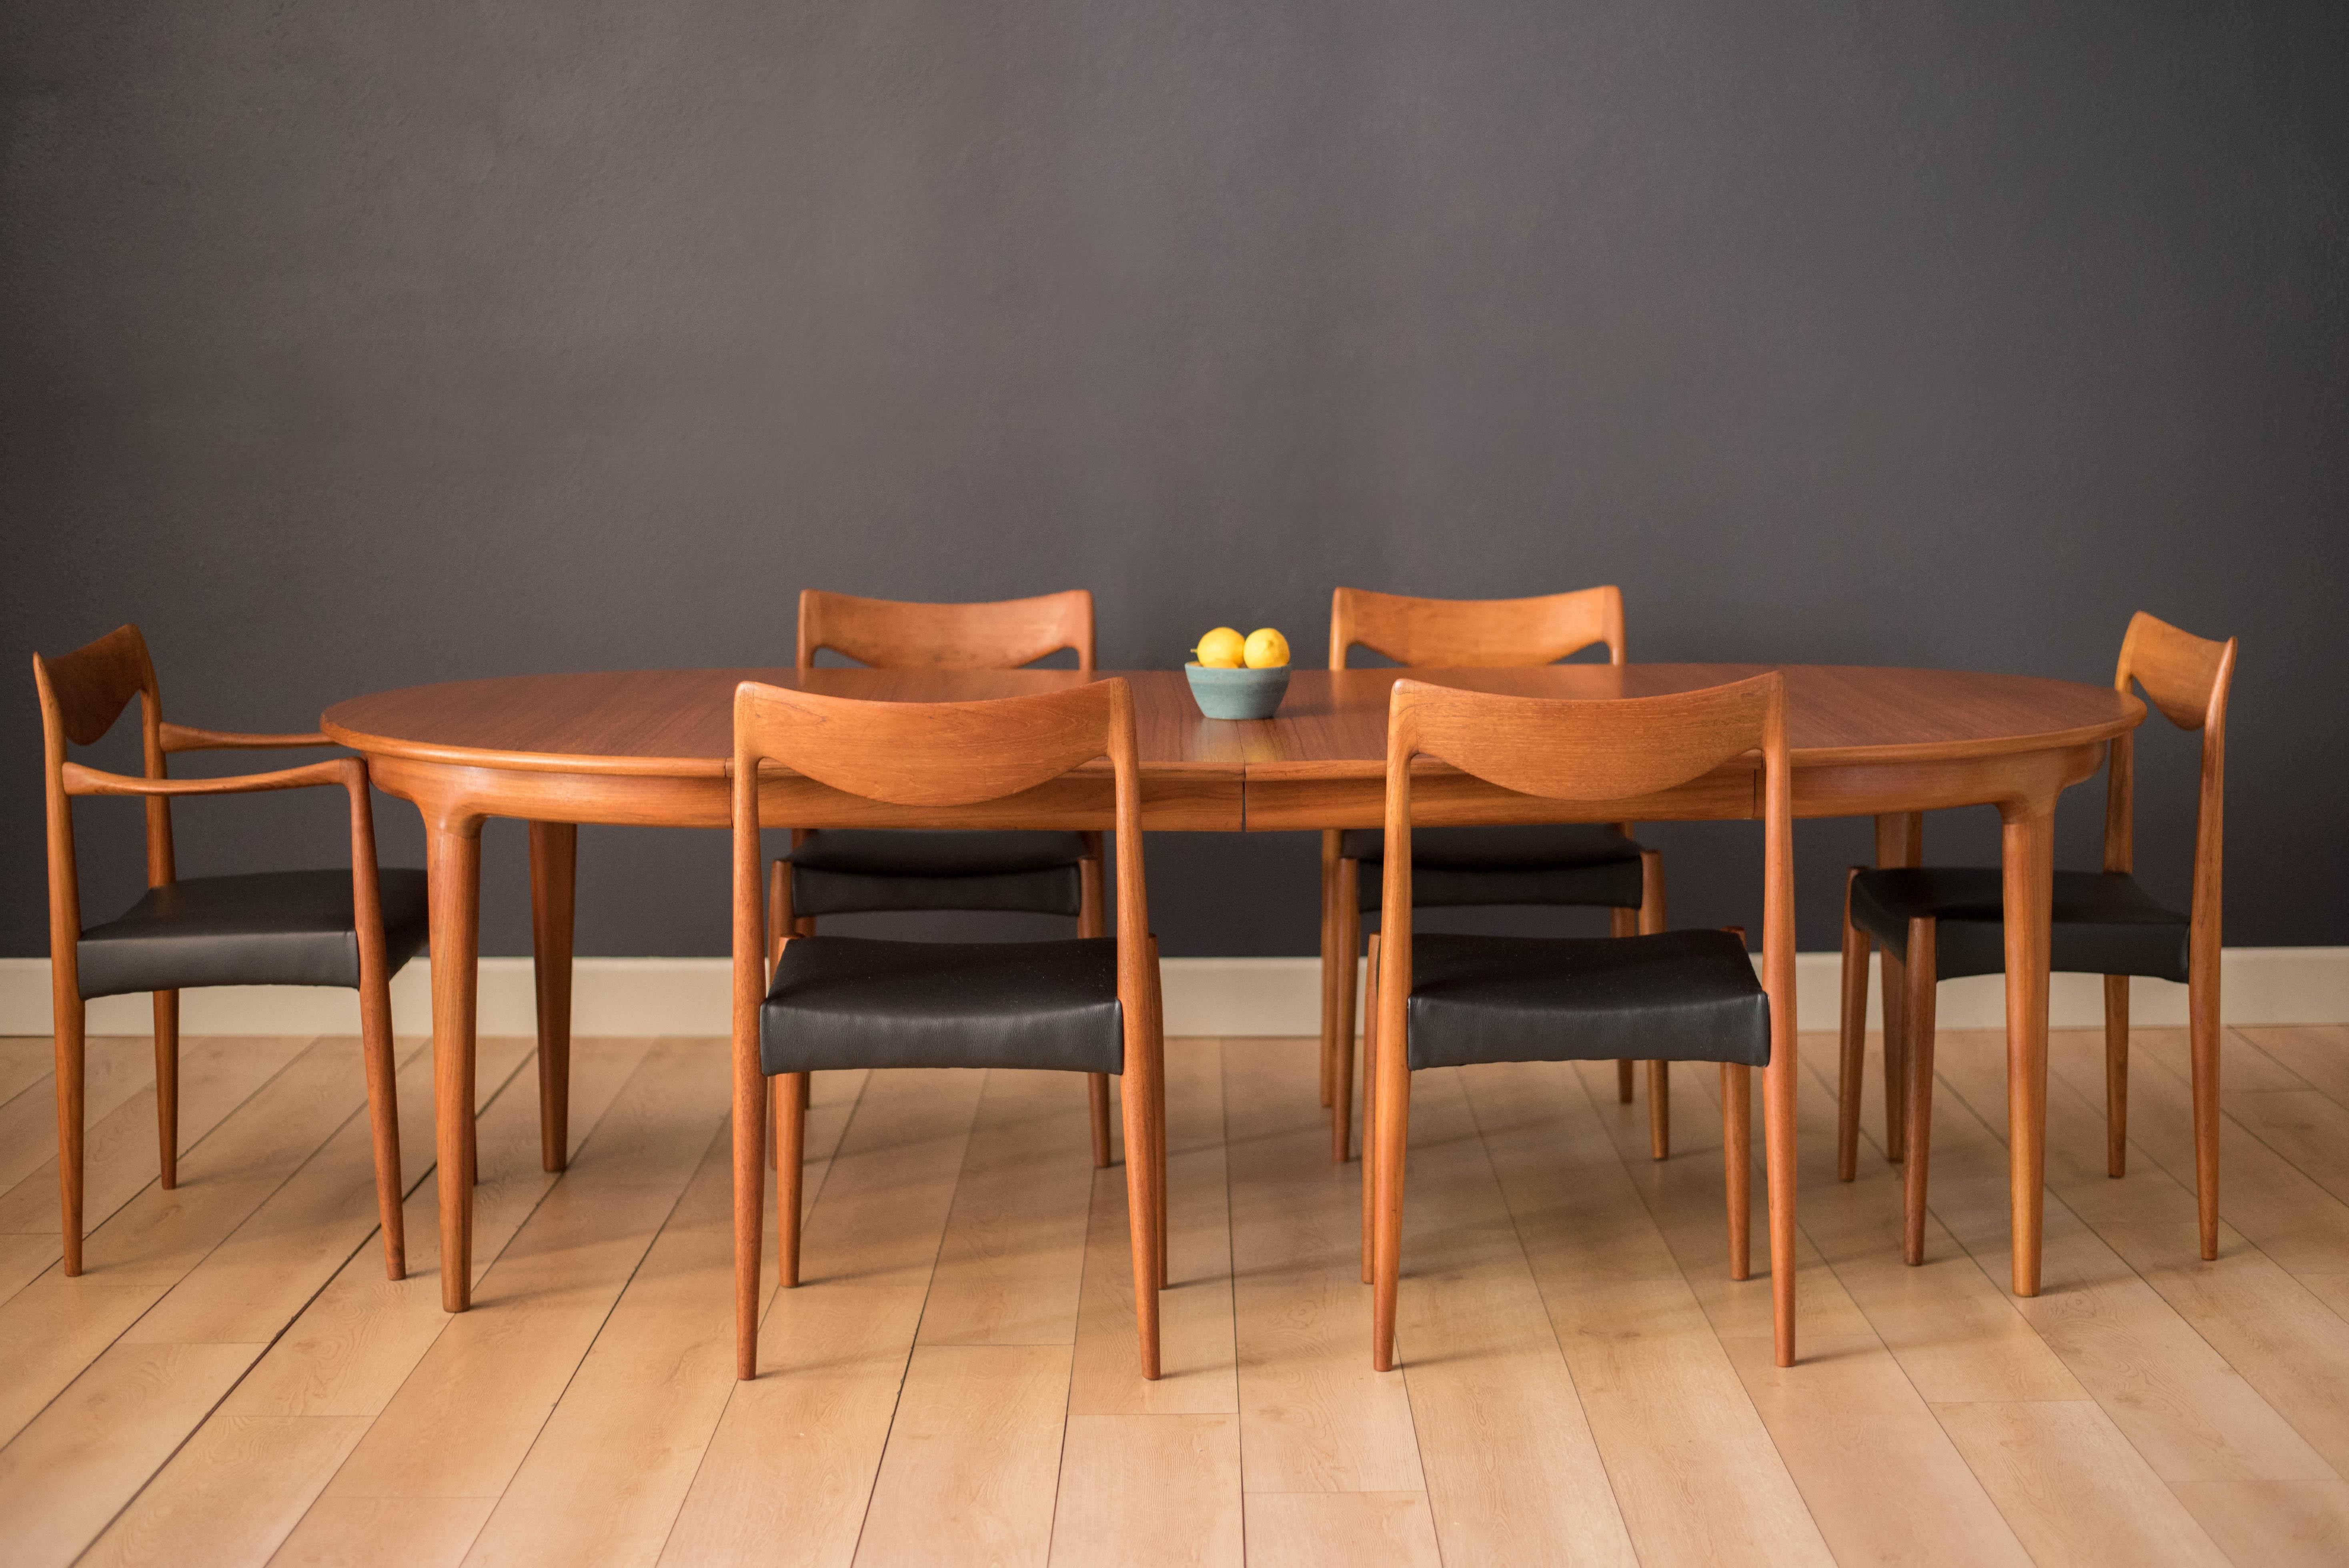 Mid Century circular dining table designed by Johannes Andersen for Uldum Møbelfabrik. This piece displays continuous teak grains and solid edge banding with a seamless sculpted apron. Includes two separate leaves that extend to an oval tabletop to